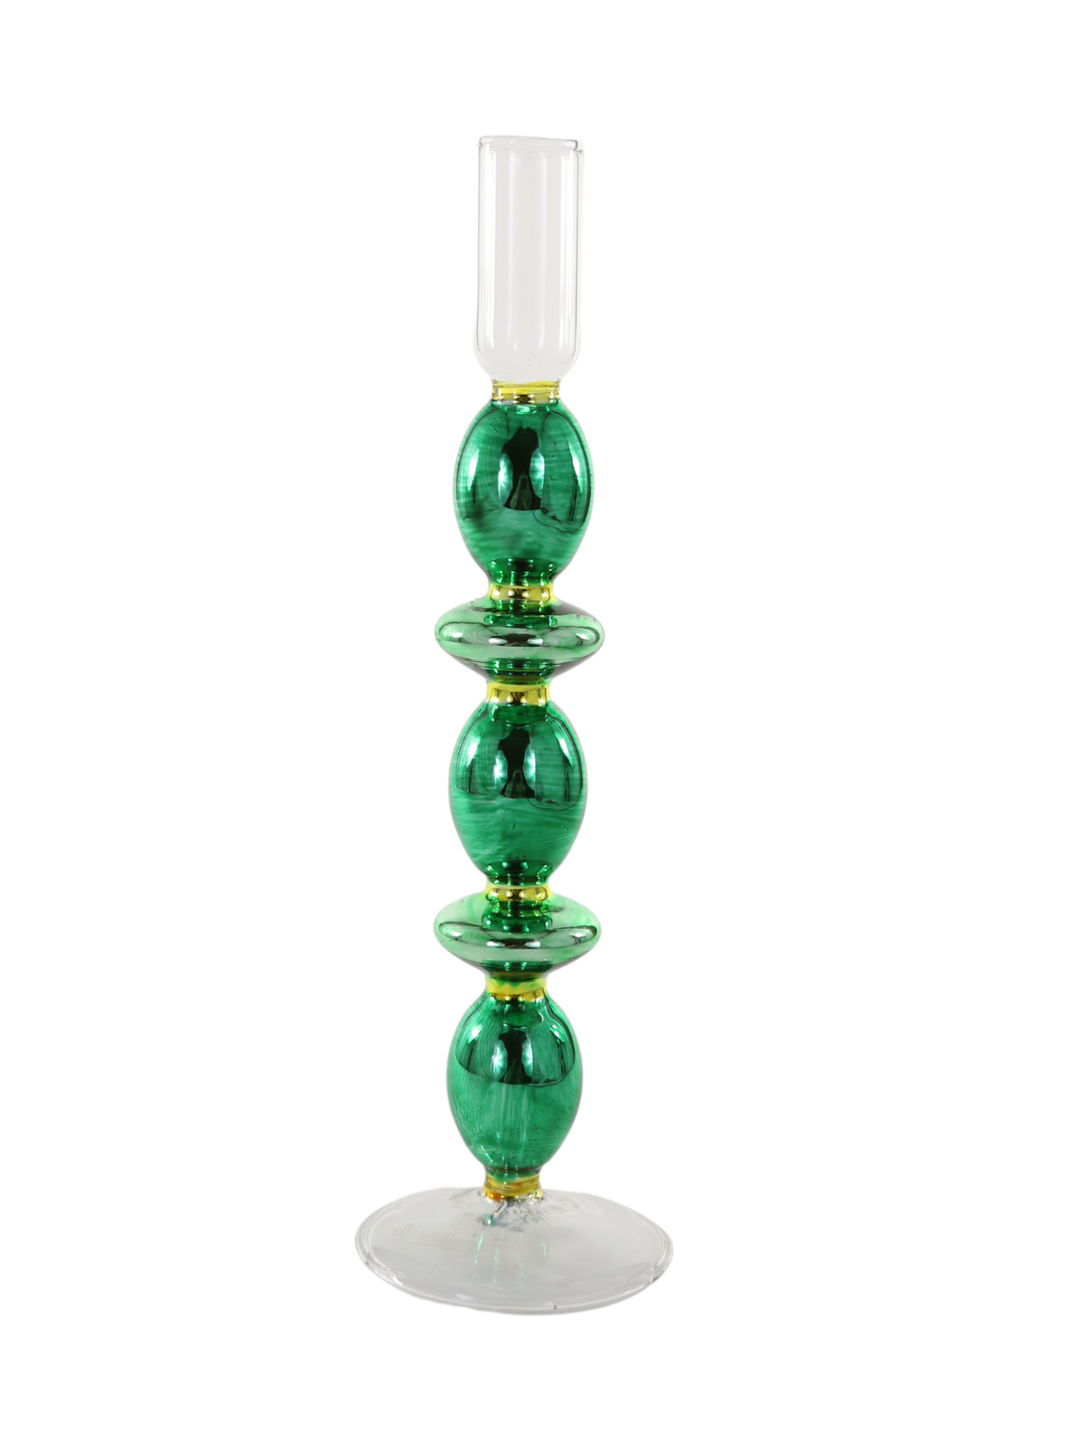 SHINY GREEN SPINDLE CANDLESTICK Cody Foster Co. Home Candle Bonjour Fete - Party Supplies